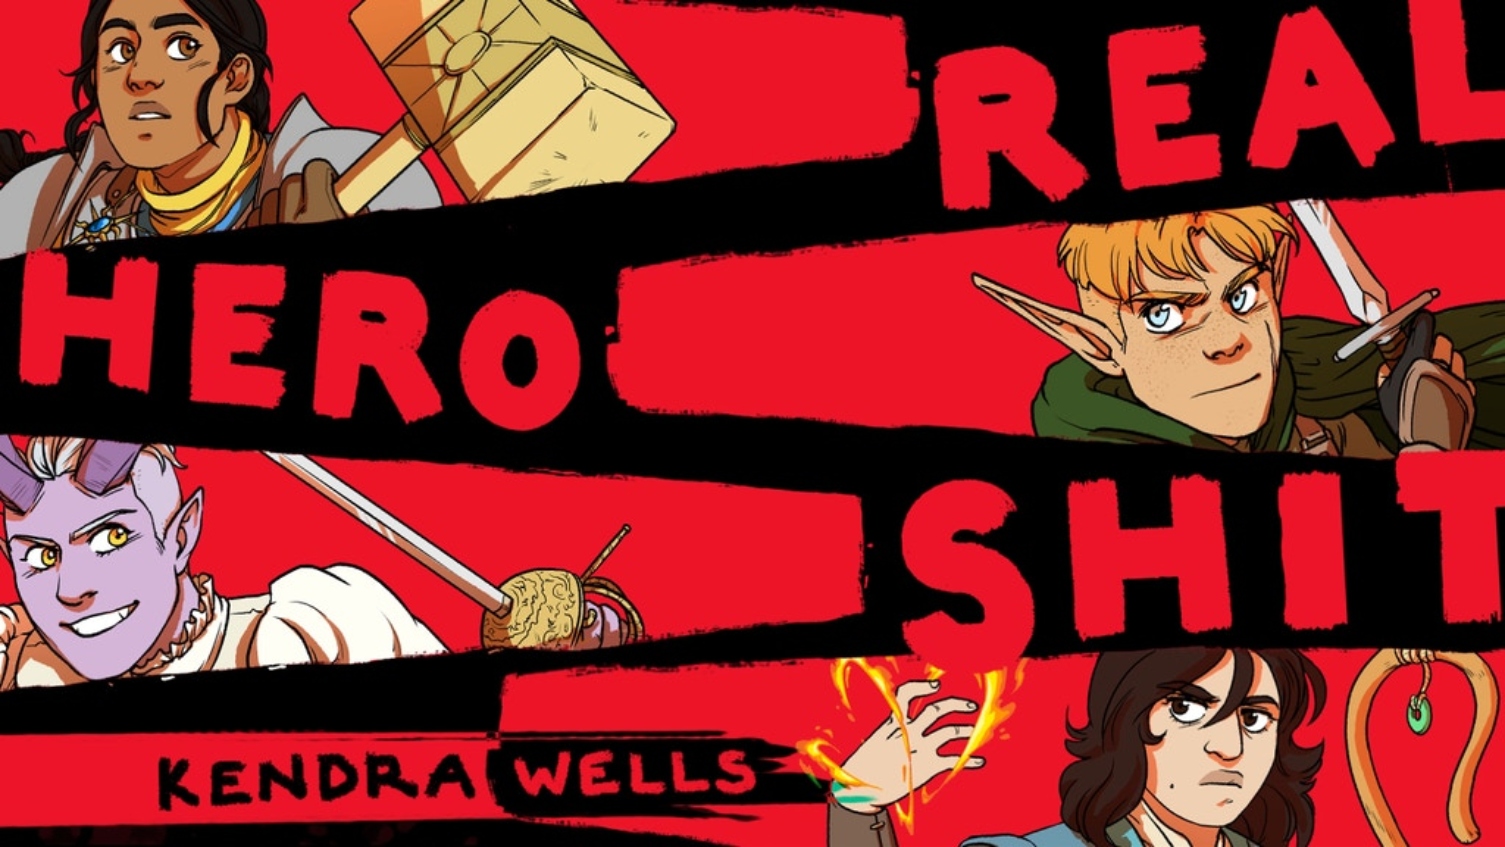 'Lord of the Rings but gay and dumb': Kendra Wells on 'Real Hero Sh*t'